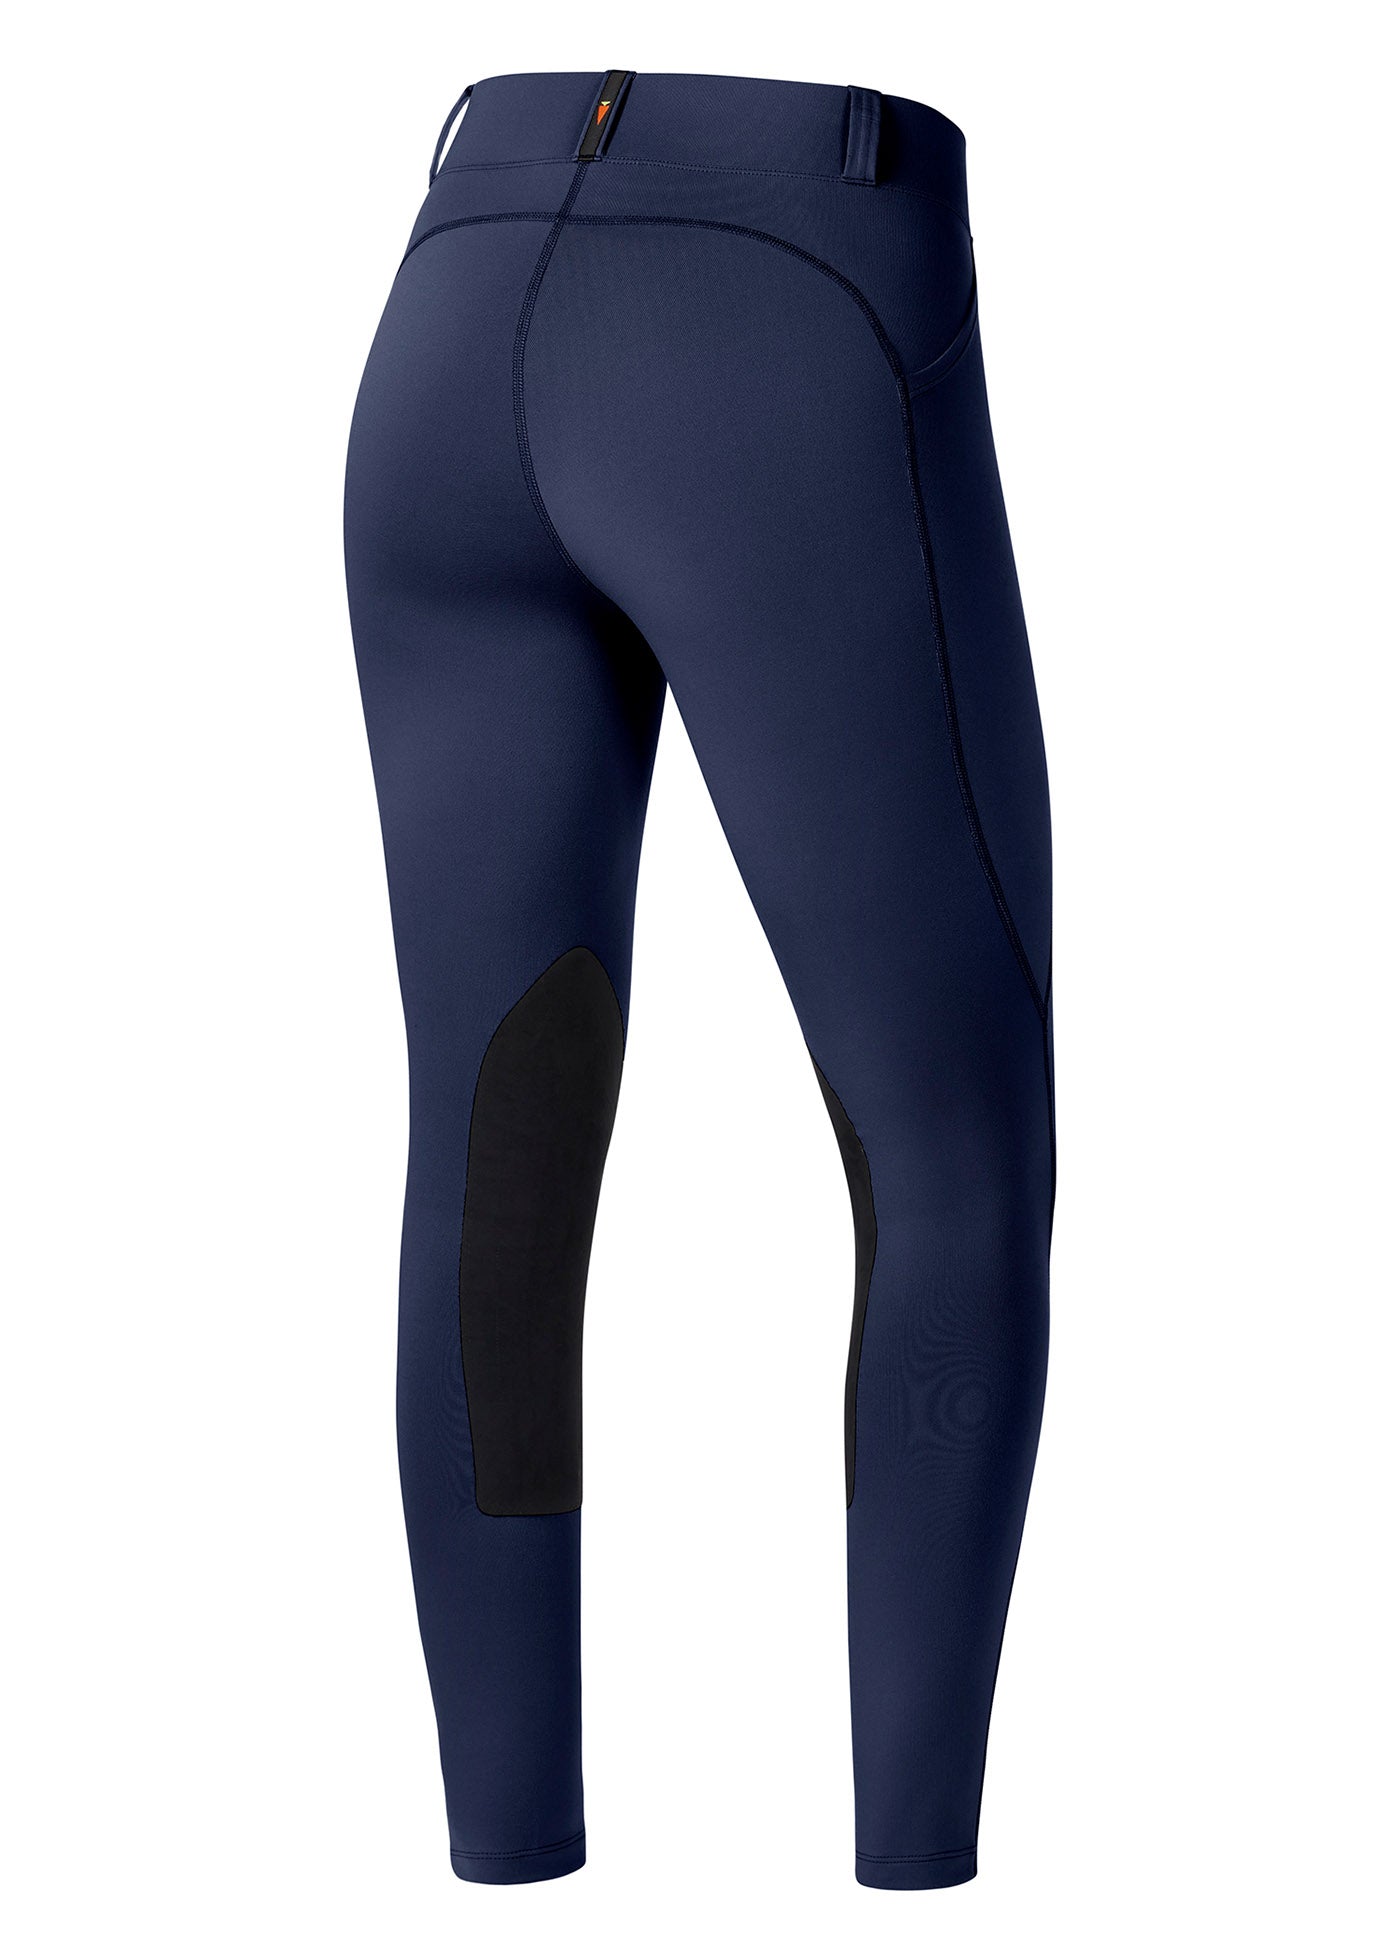 Kerrits Powerstretch Pocket Tights II Review – The Comfy Horse